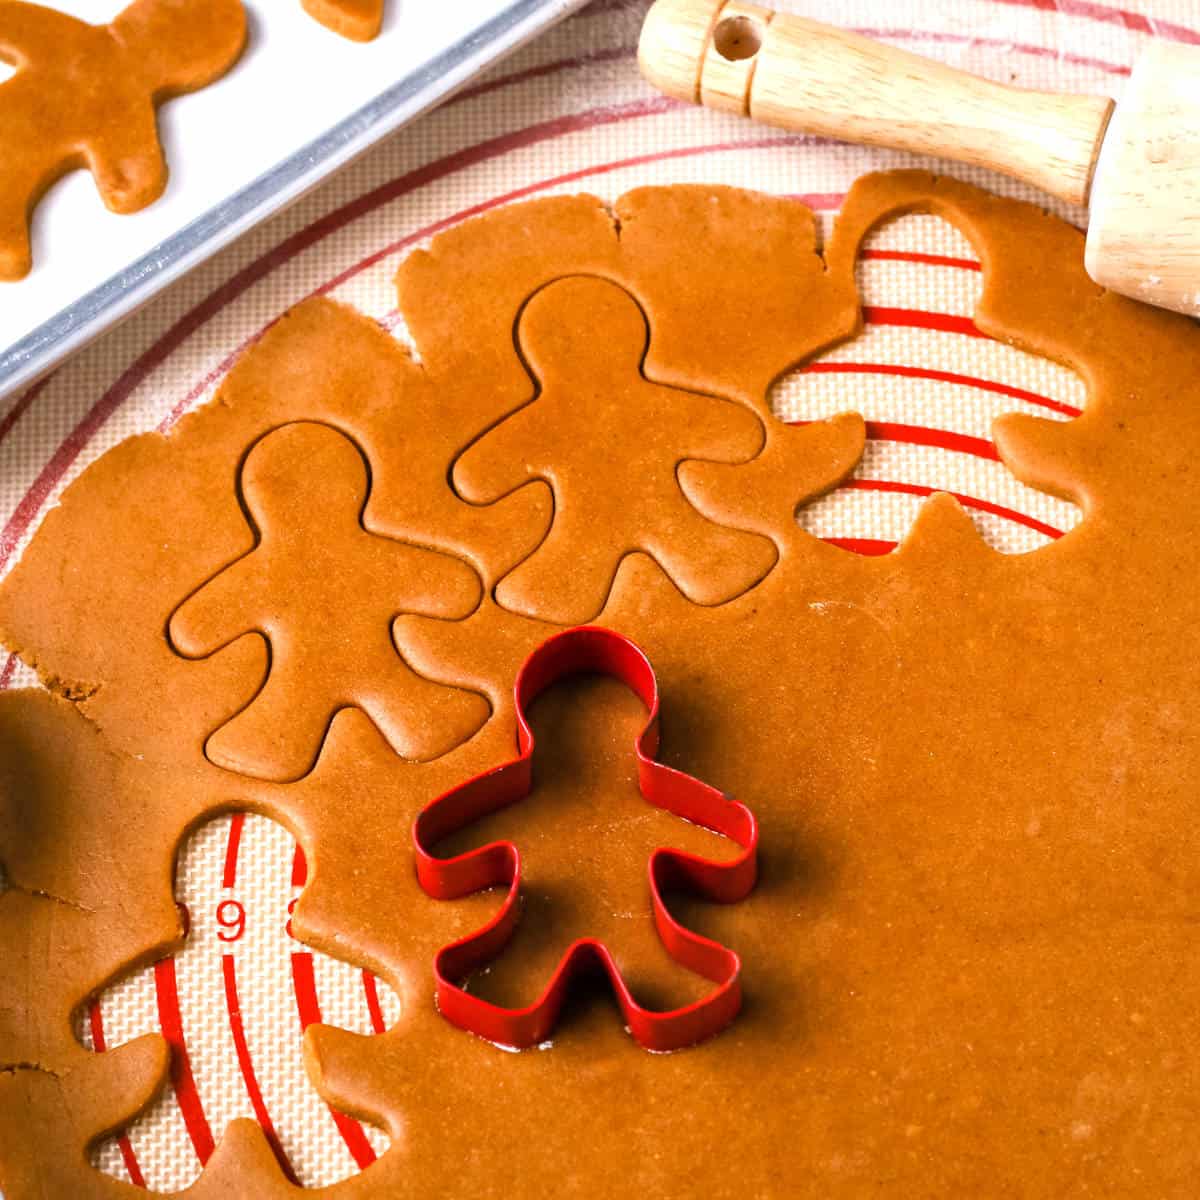 Cutting out the cookies with gingerbread man cookie cutters.